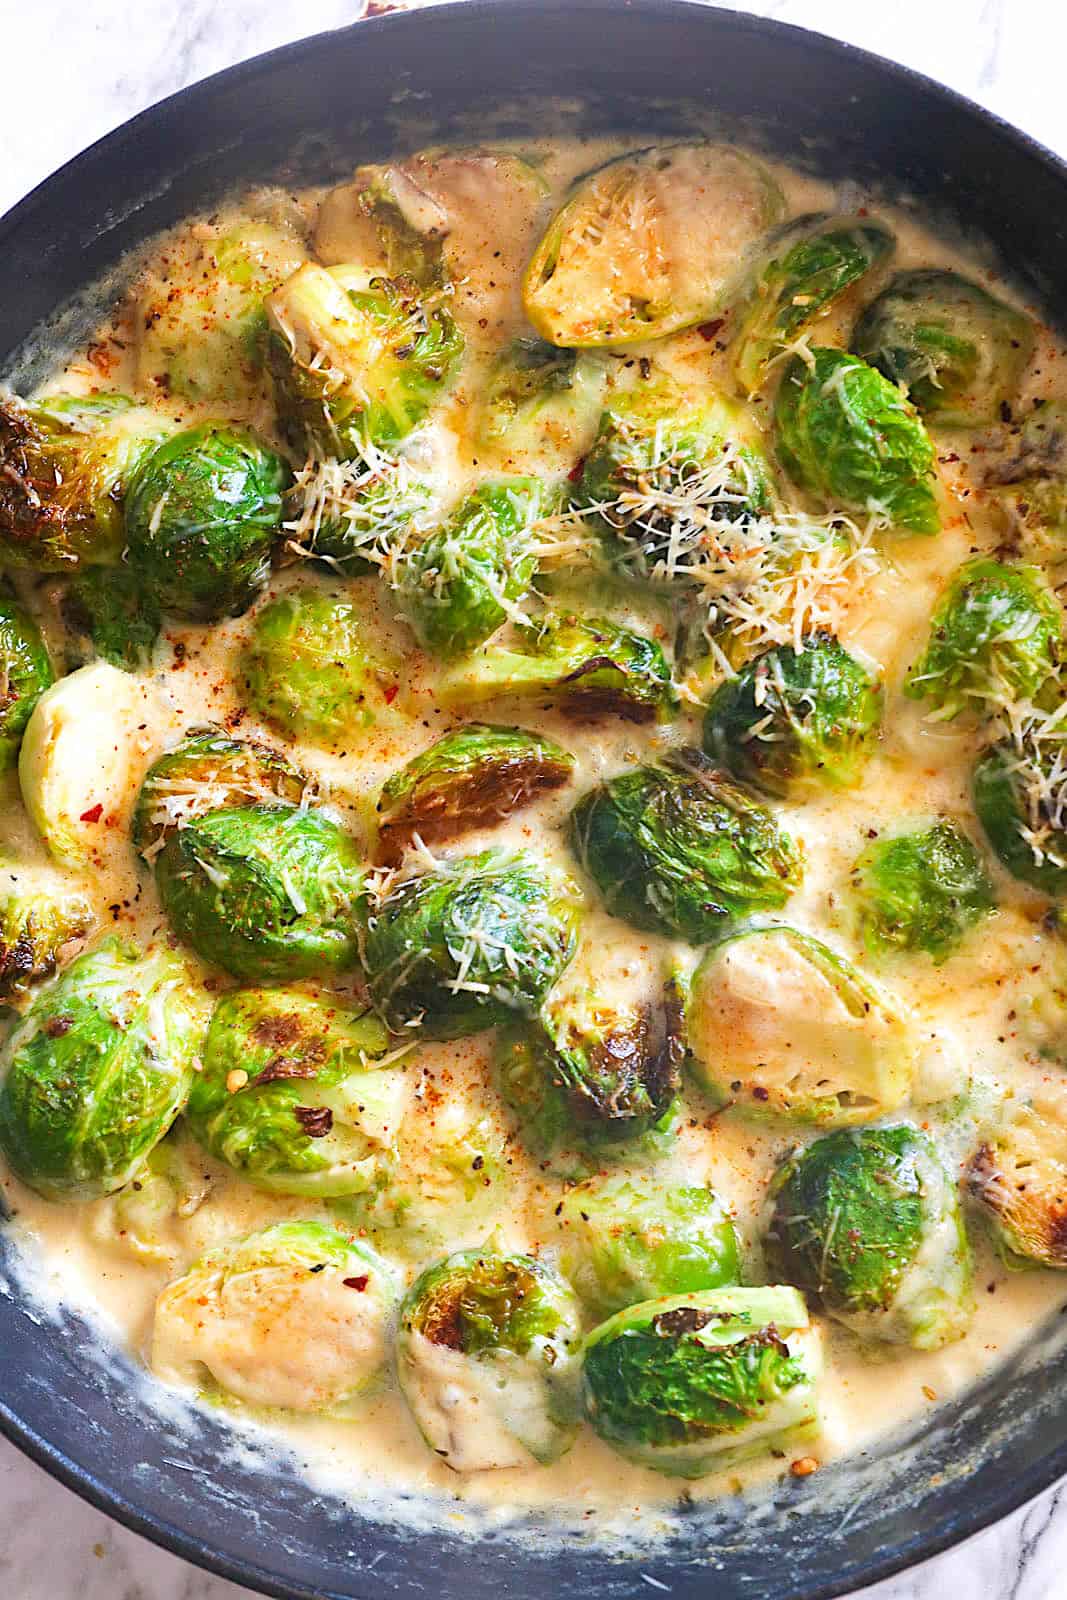 Freshly baked and creamy Brussels sprouts for the win